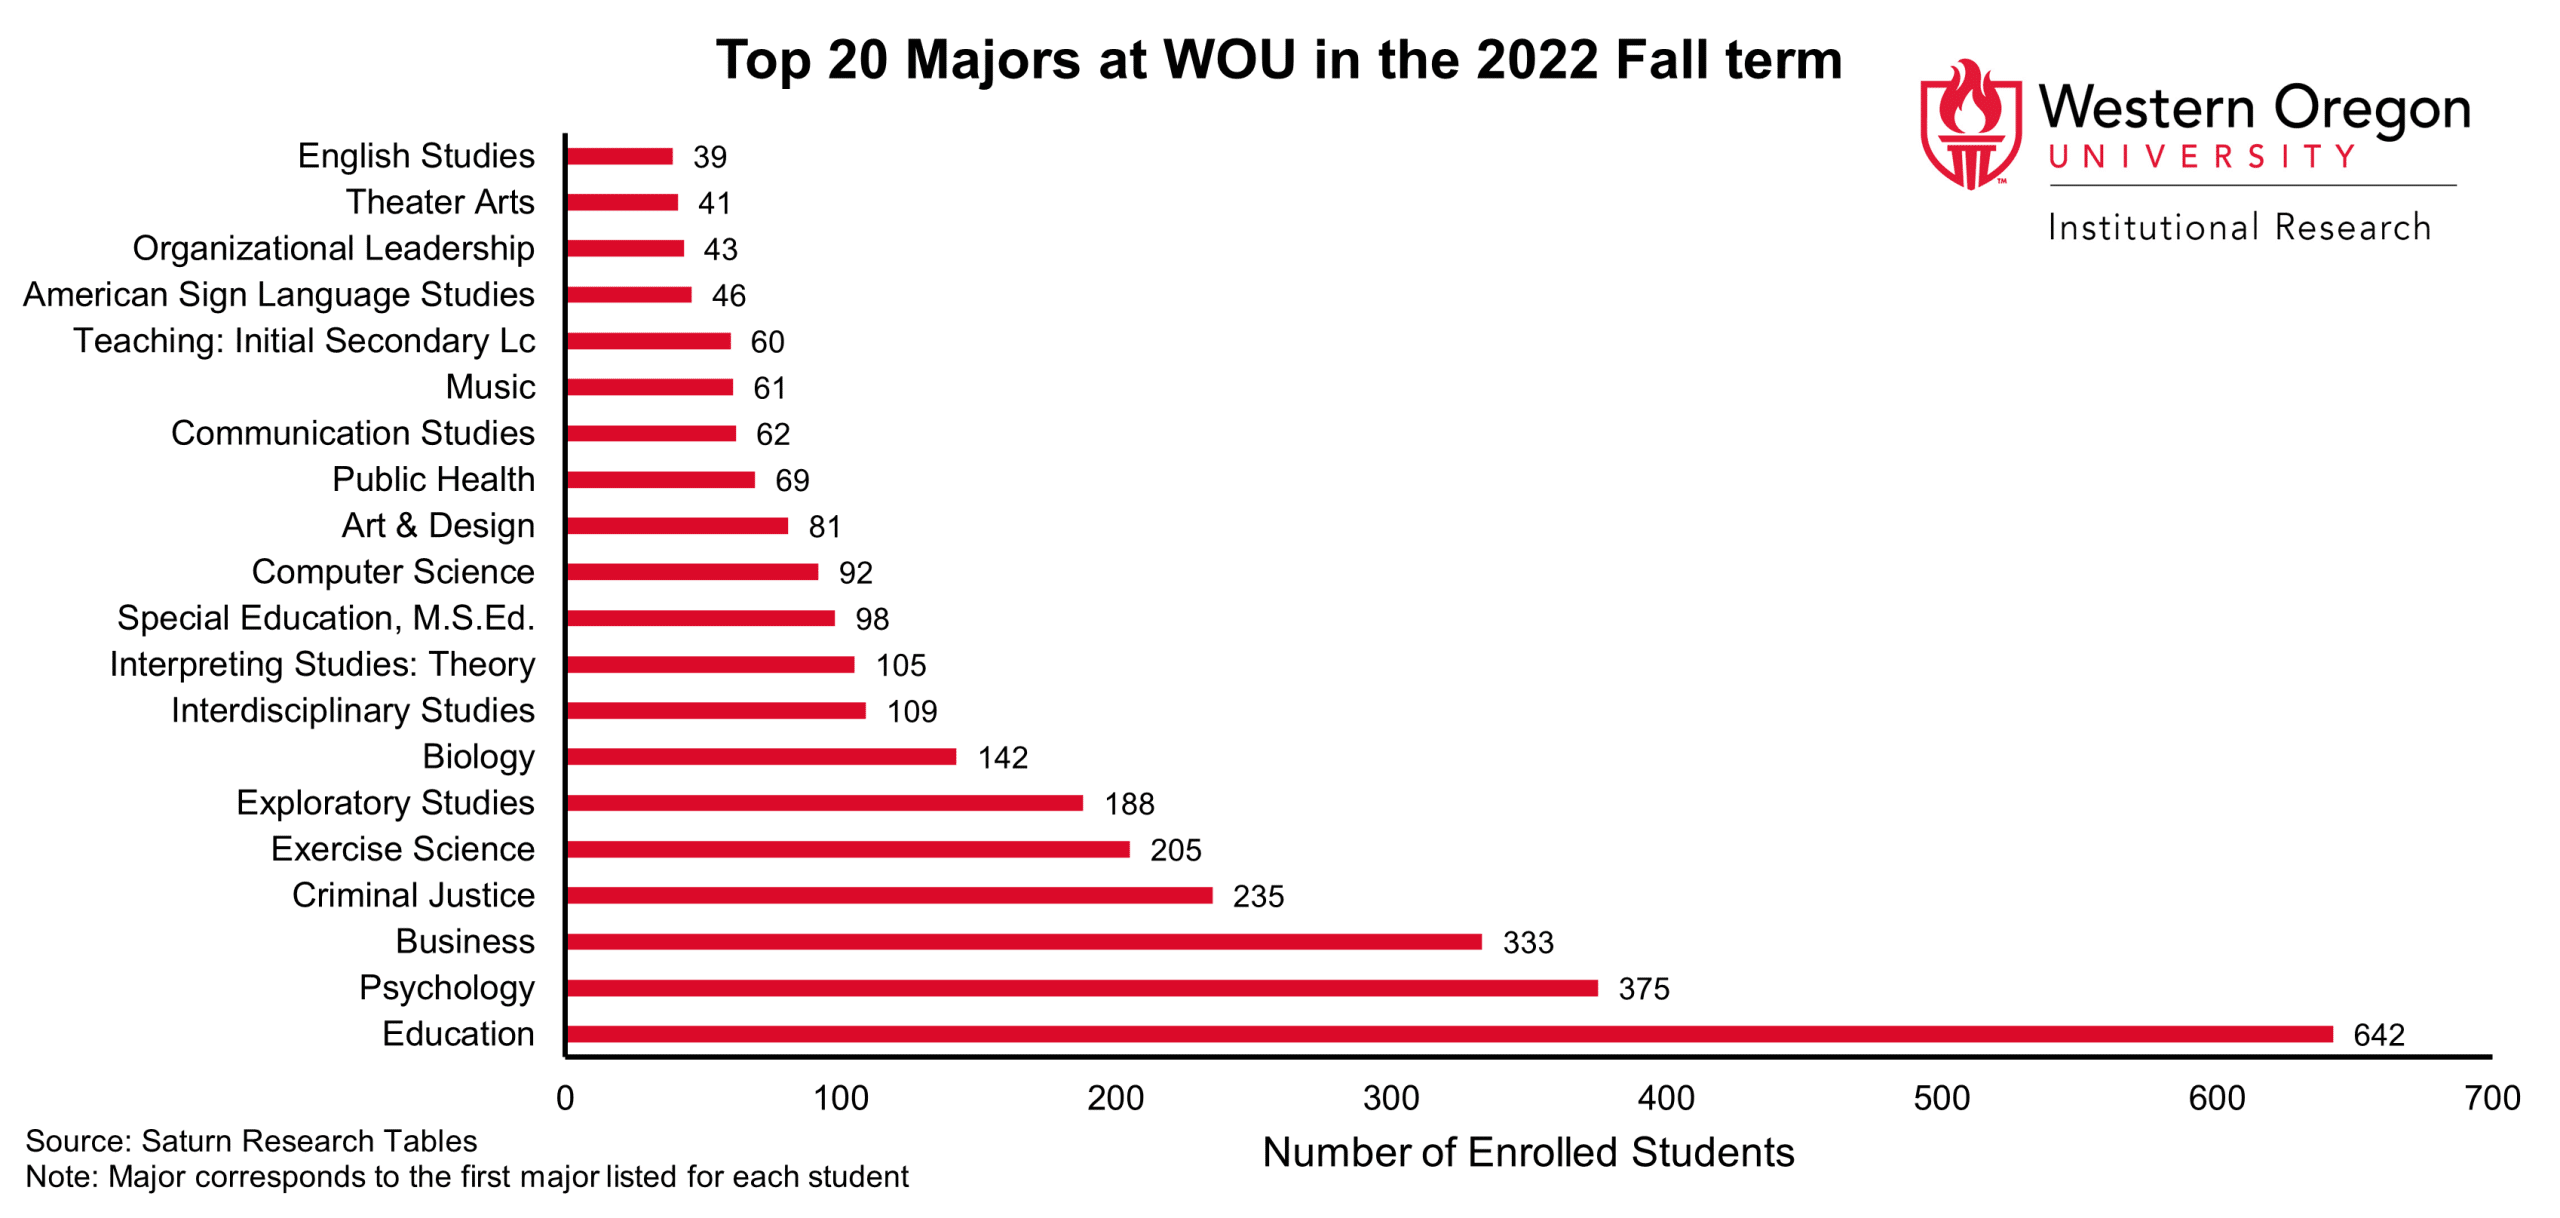 The 20 majors with the most students at WOU